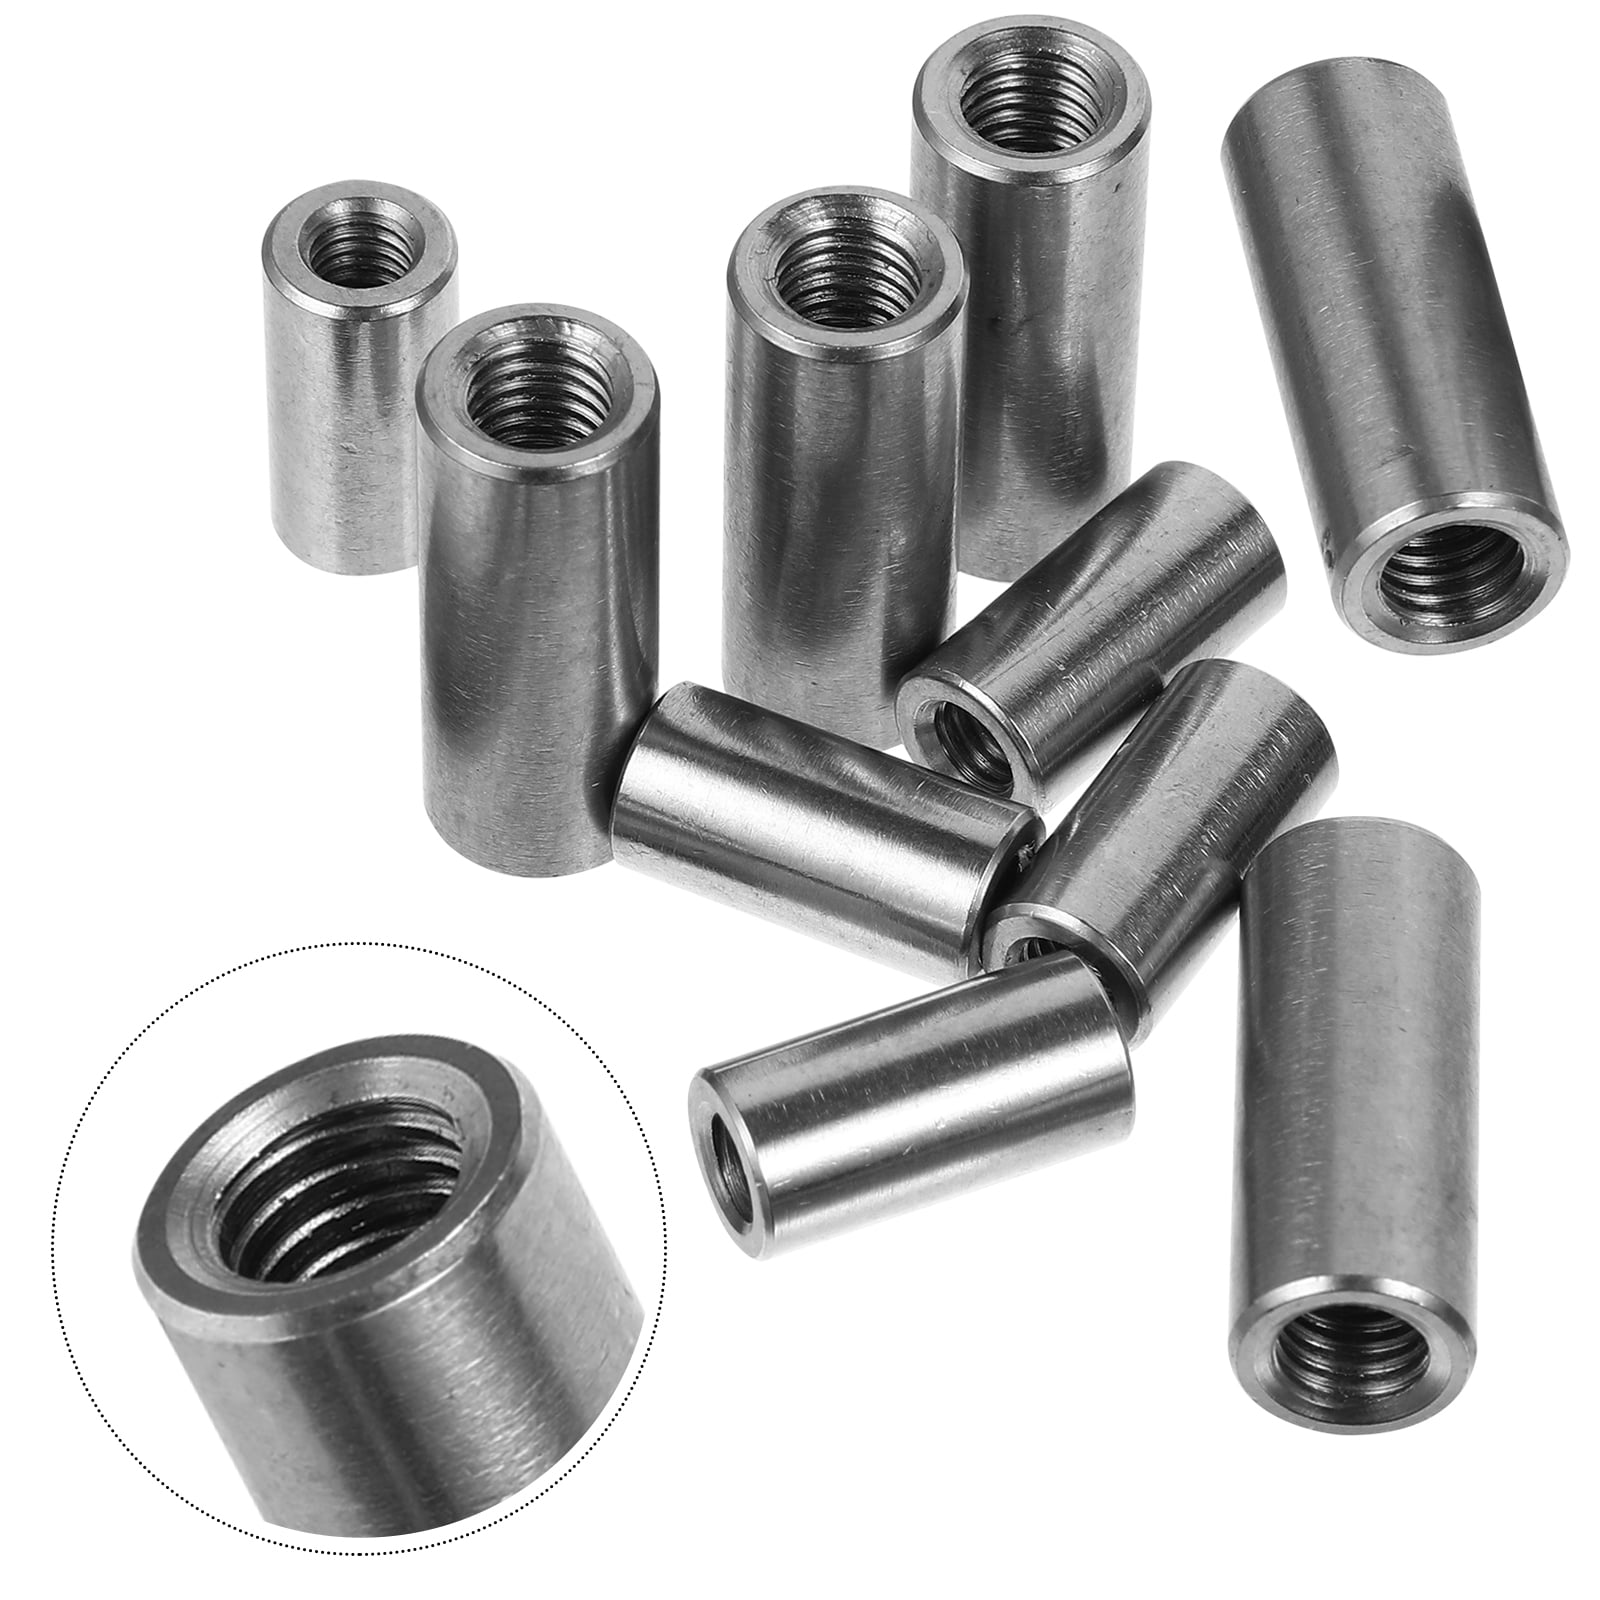 Round Coupling Nut Sleeve M3-M16 Full Thread for Thread Rod Stud Stainless Steel 